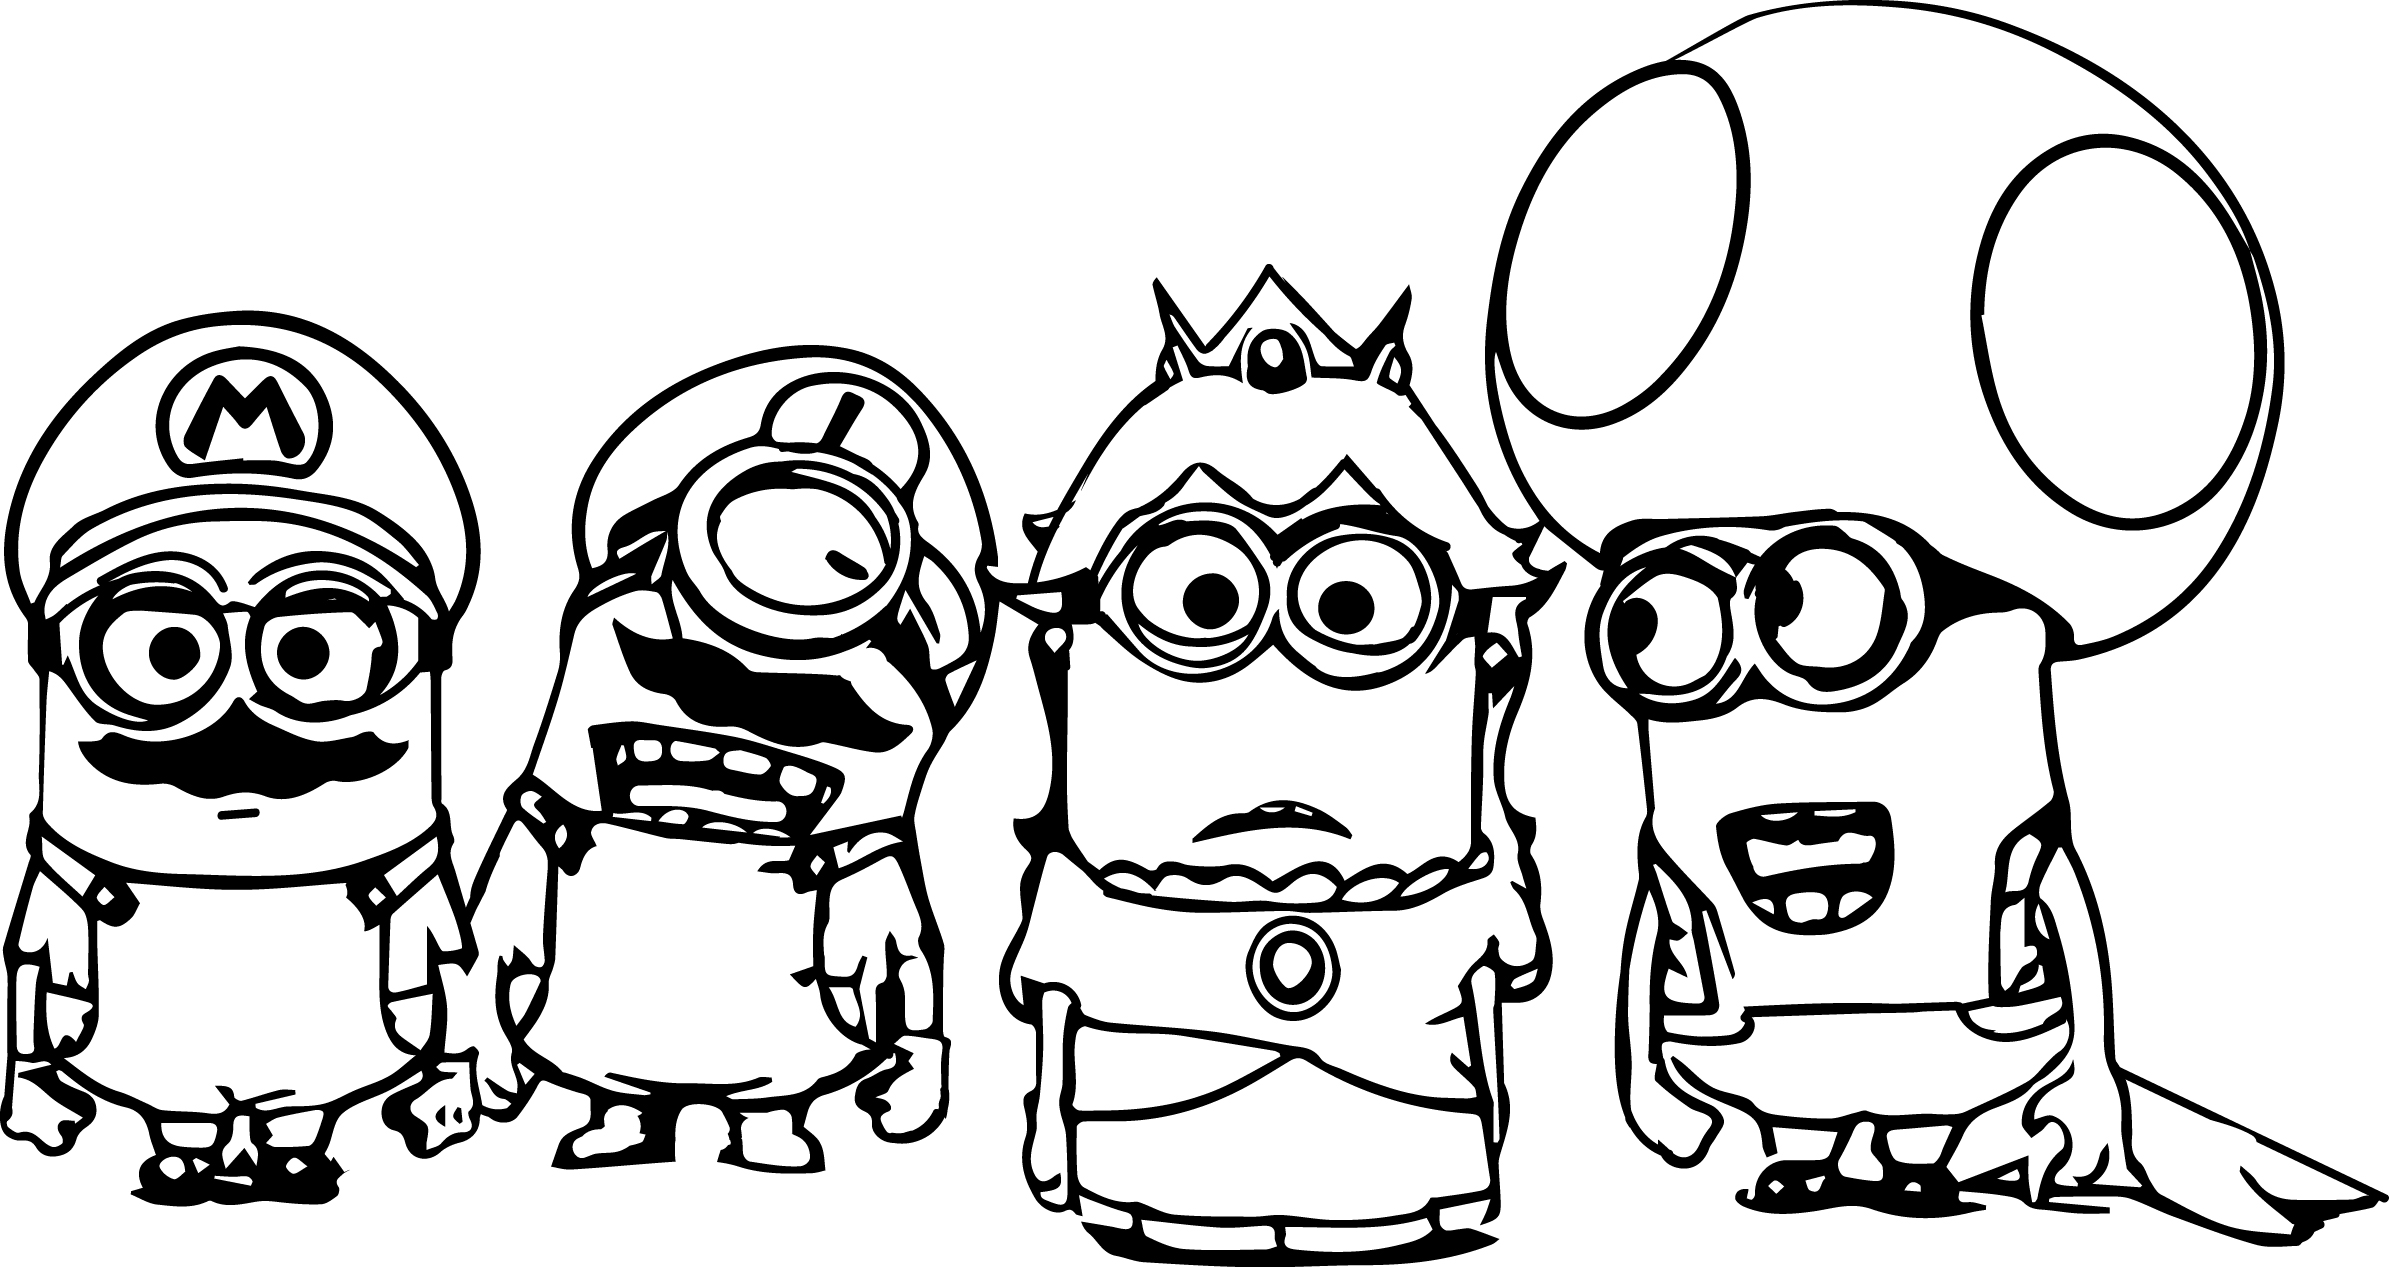 minions coloring pages minion coloring pages best coloring pages for kids minions coloring pages 